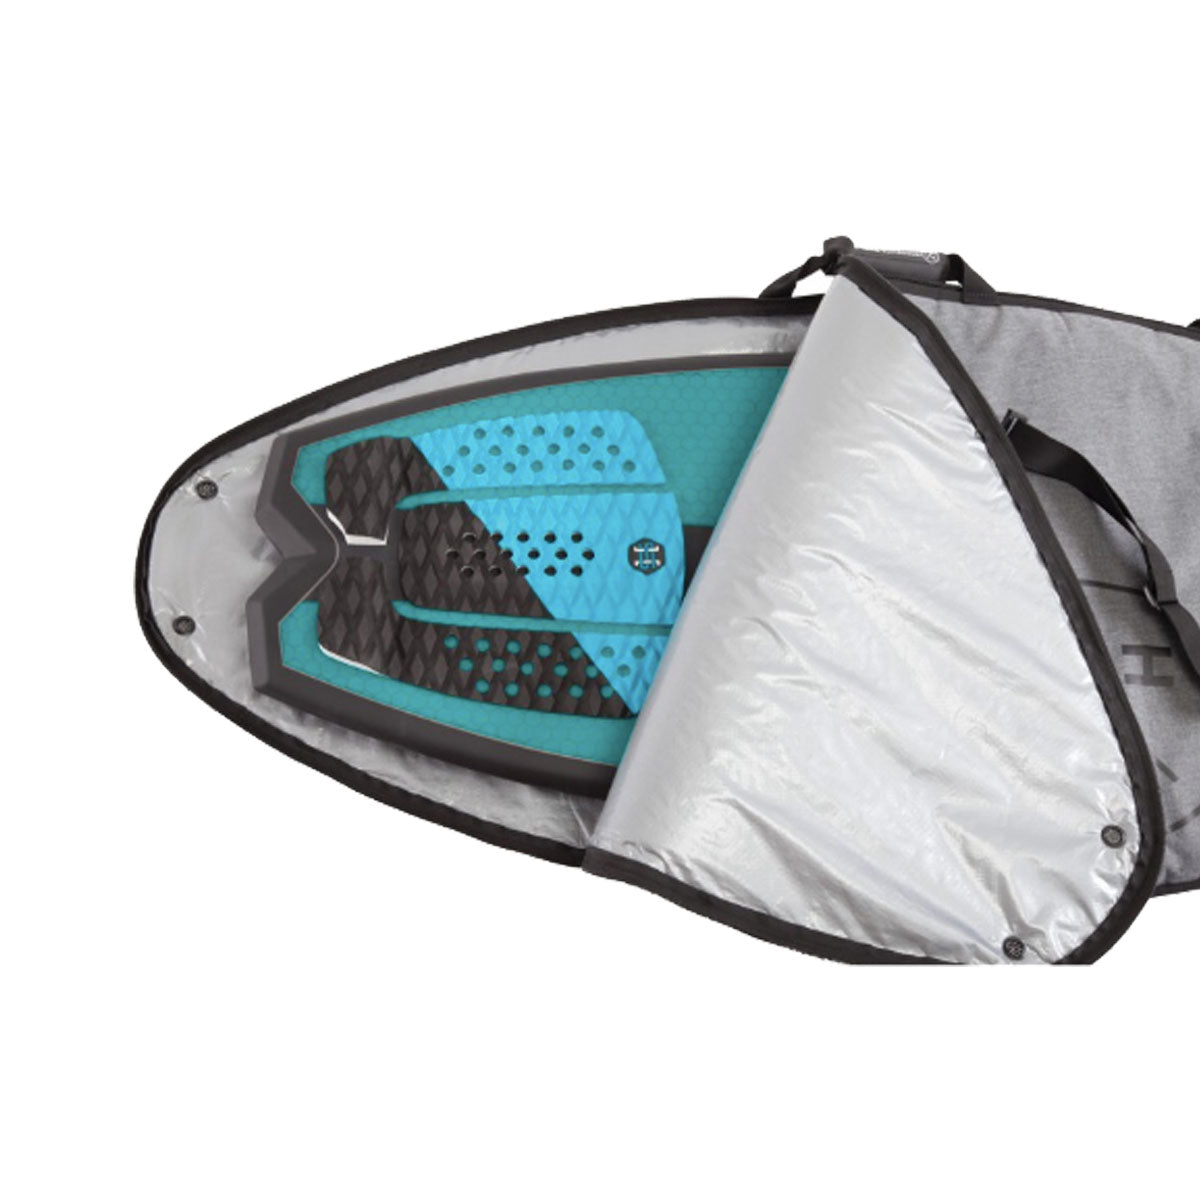 The Hyperlite Wakesurf Bag is a spacious bag with inner and outer pockets, providing large storage area for all your essentials.